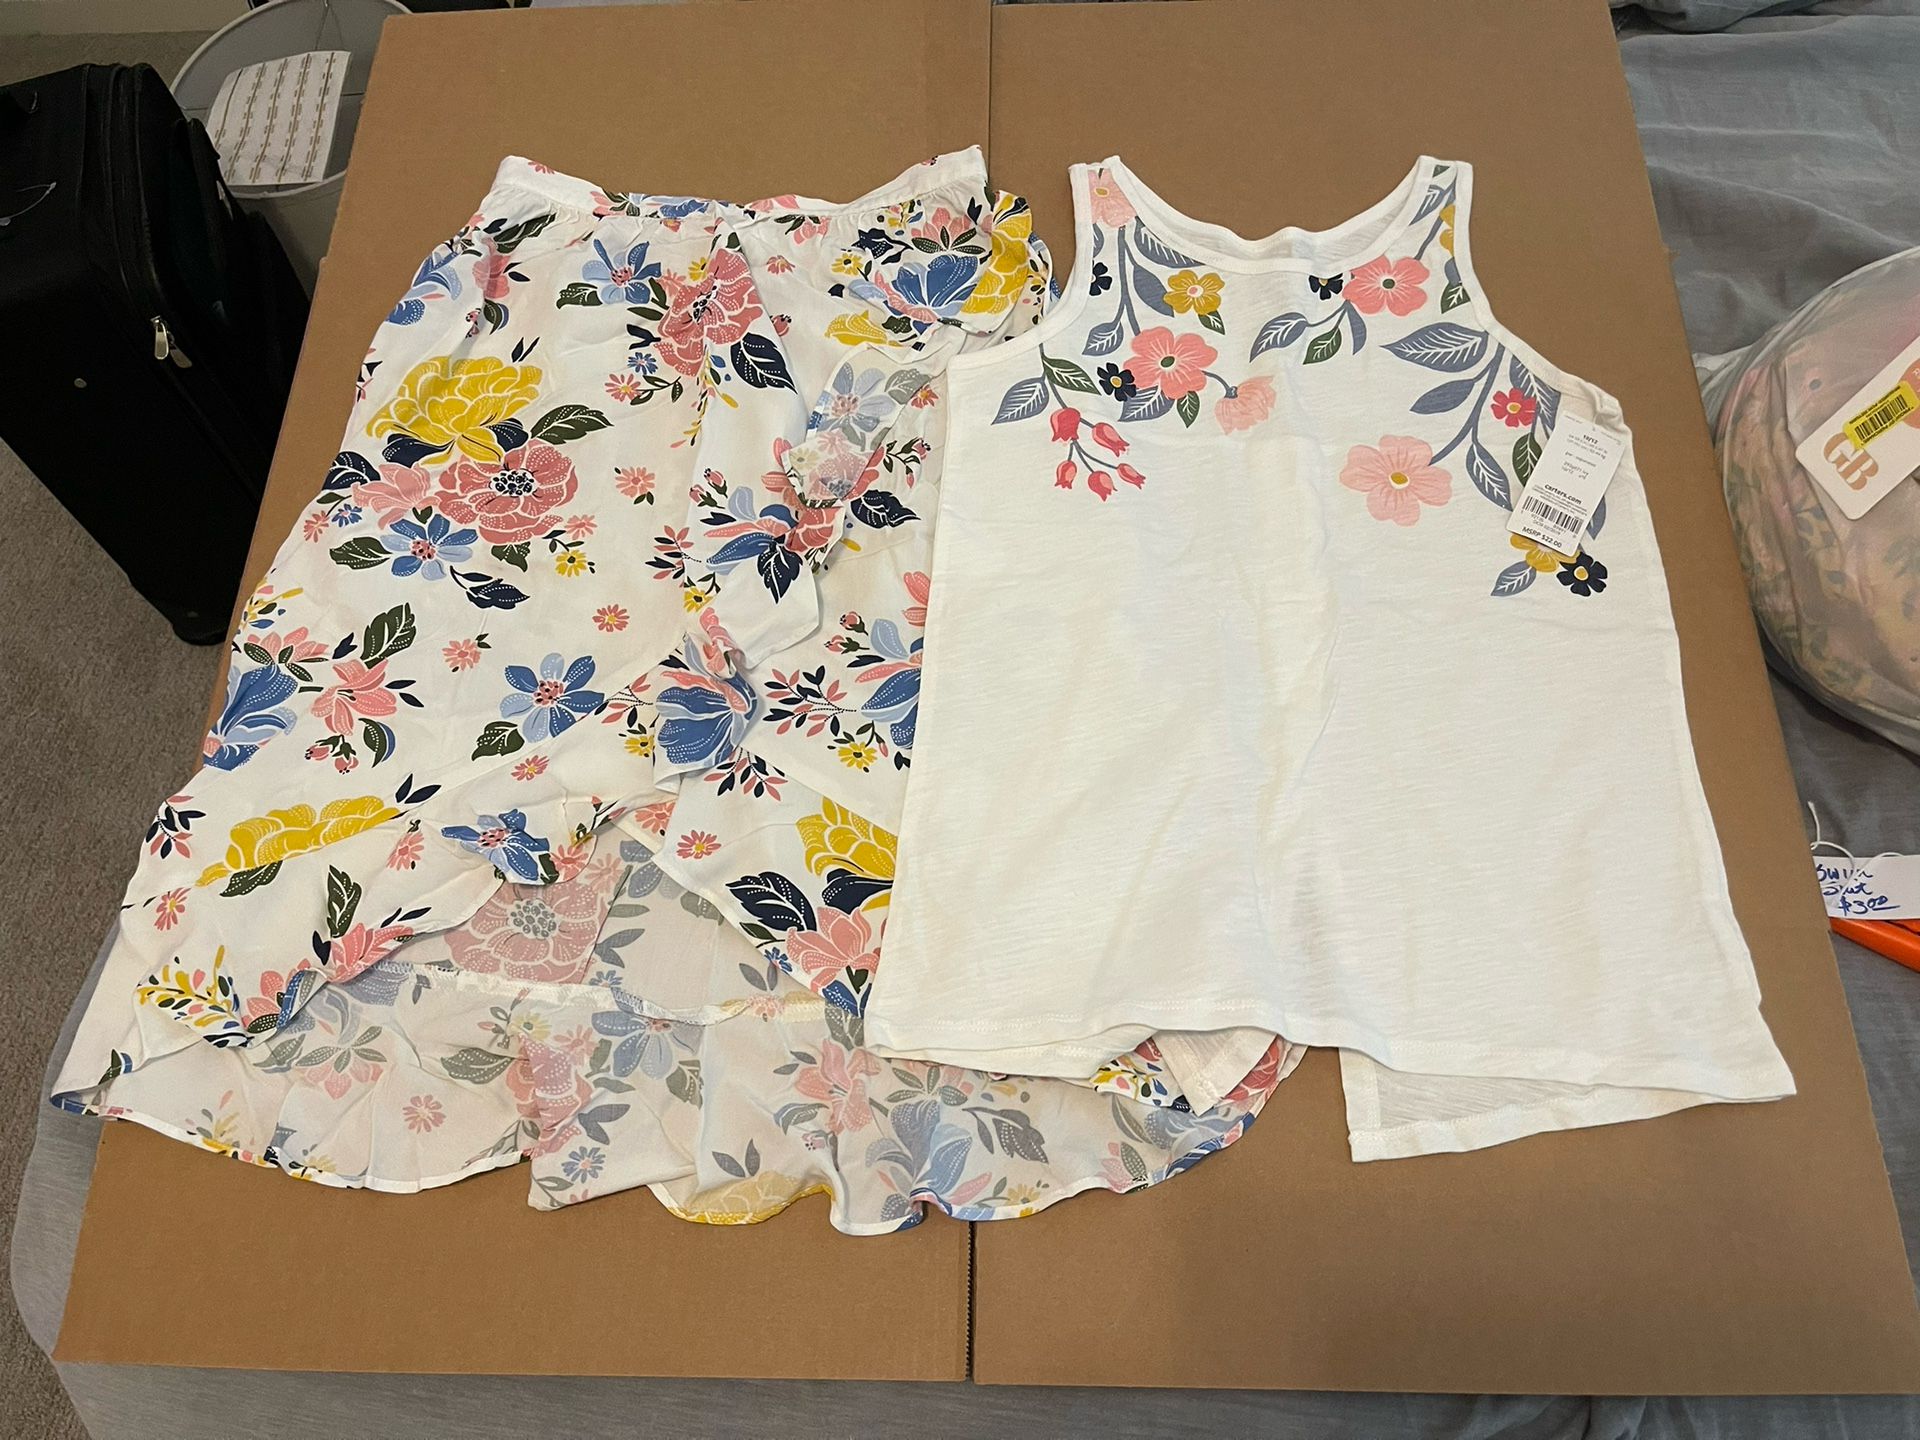 Carter’s girls size 8 floral sleeveless top and matching skirt. New with tags. 